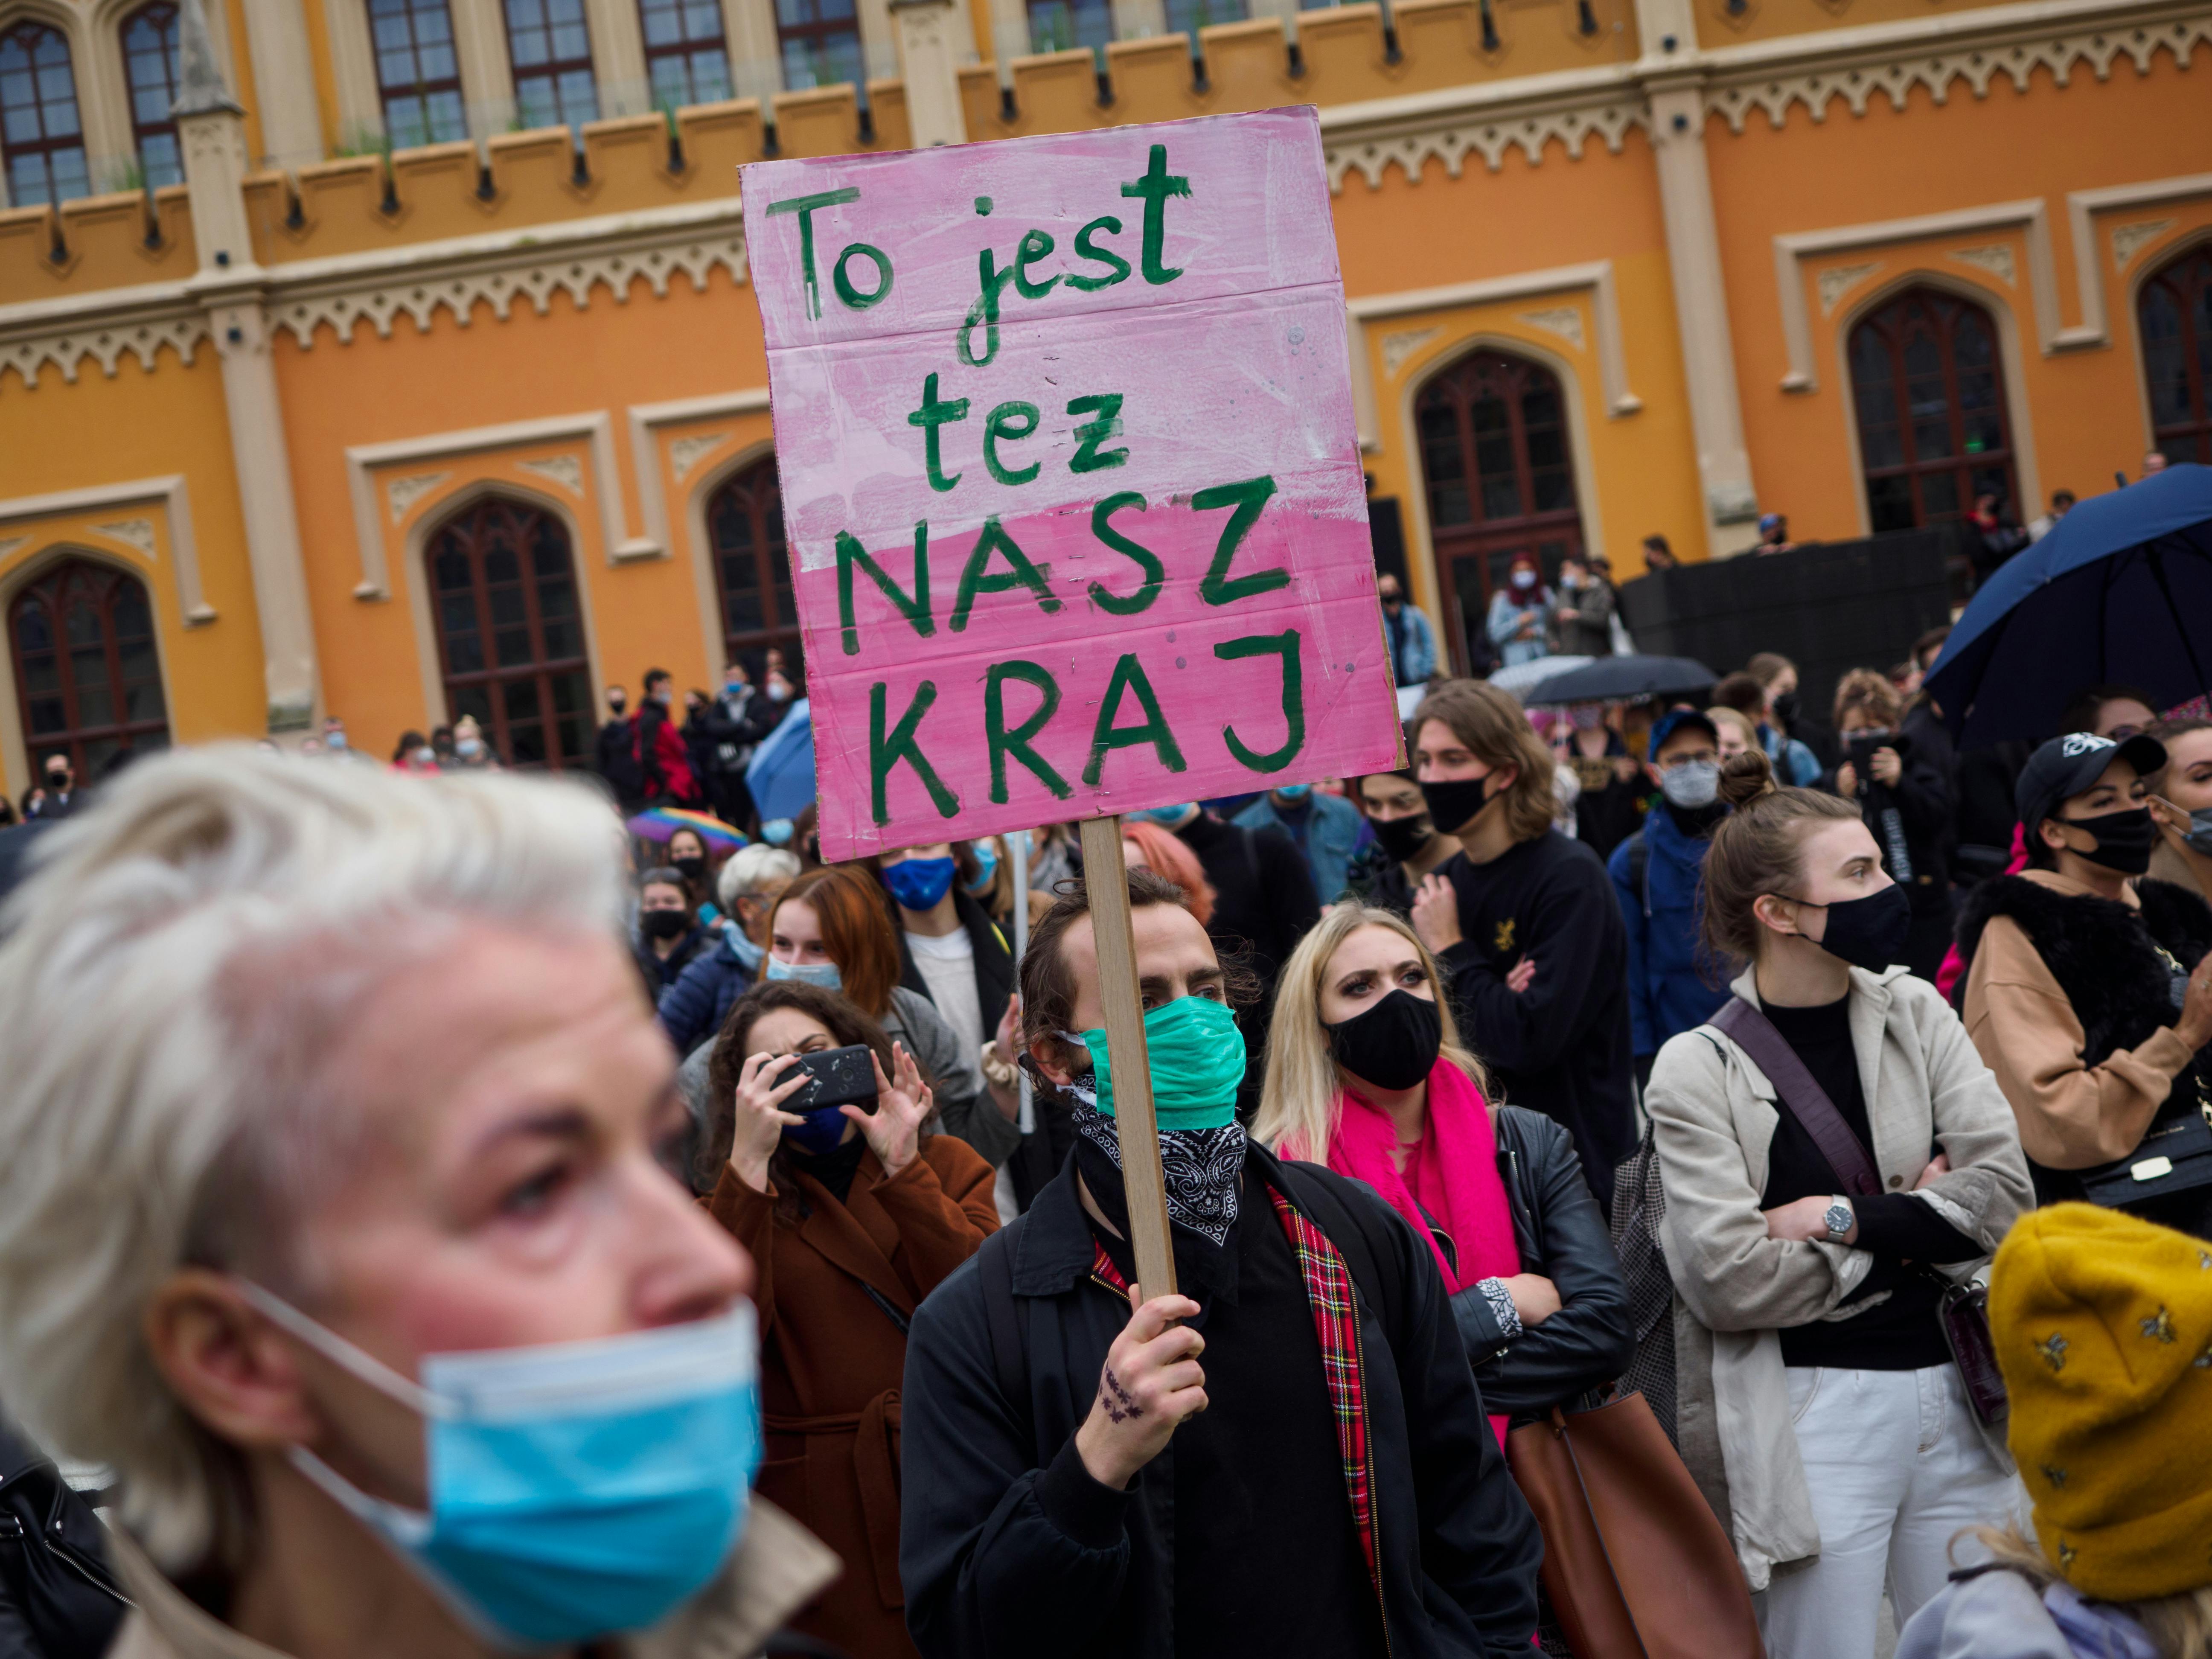 Protestors wearing masks gather in the streets of Poland. One holds a pink sign.